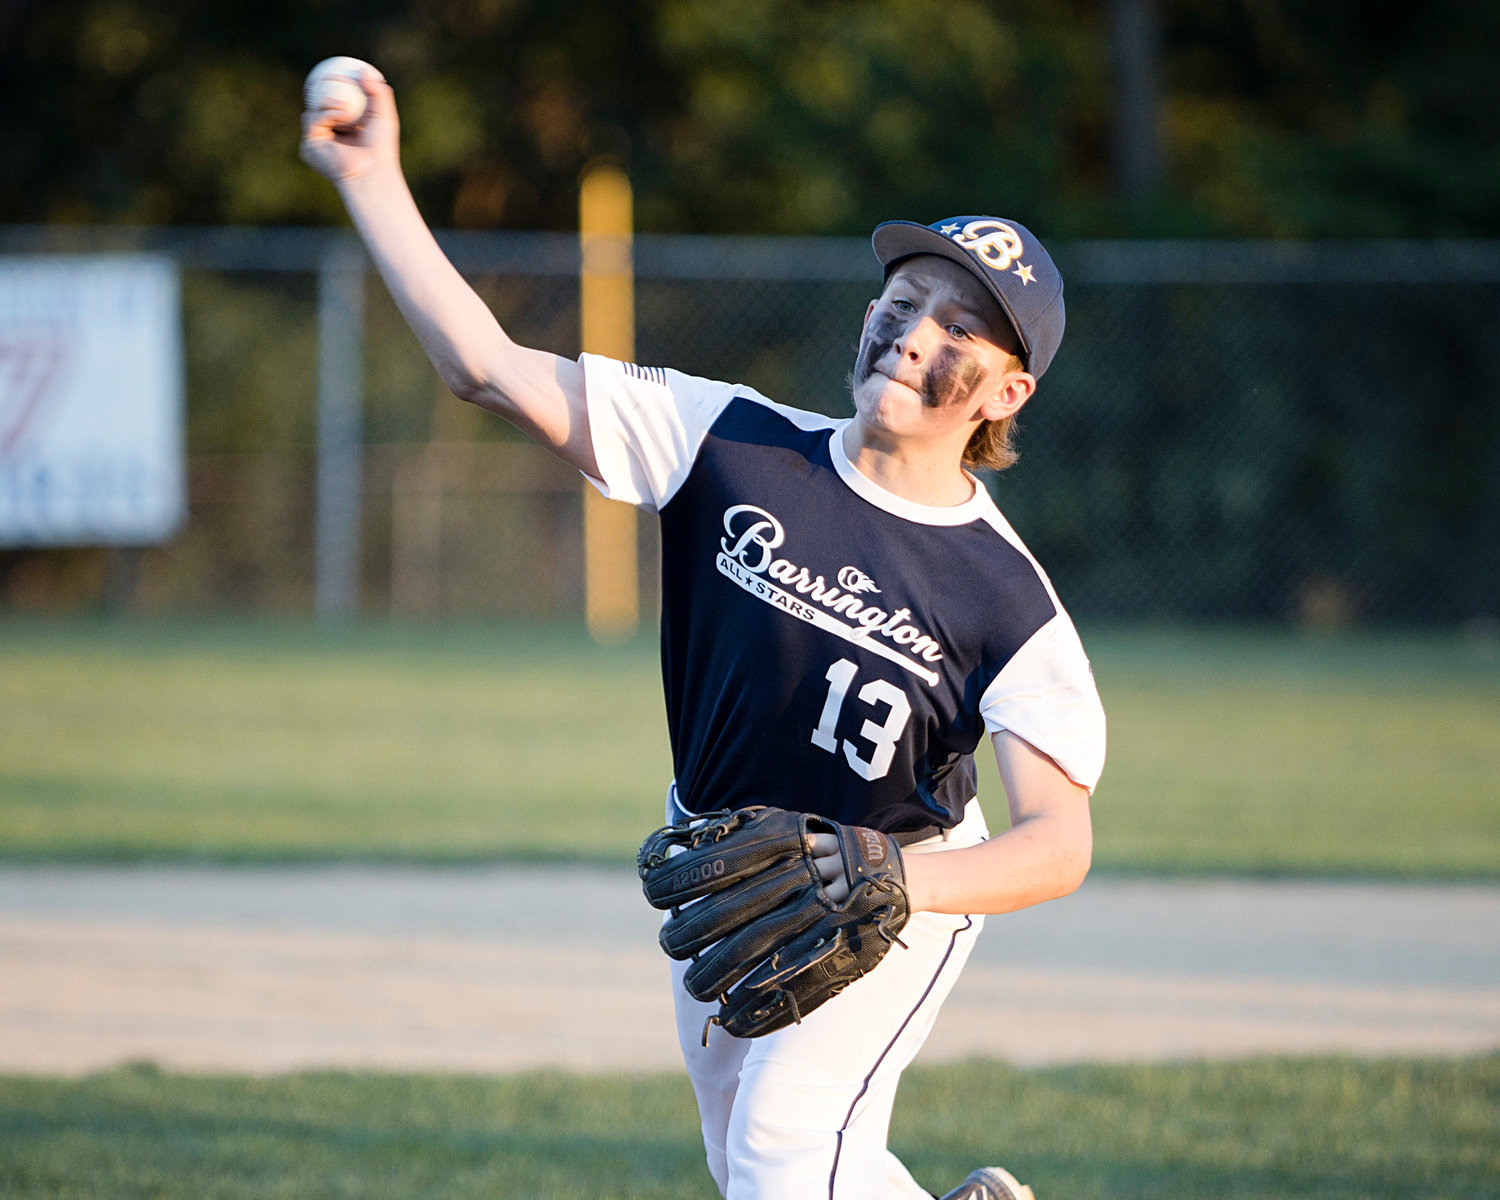 Sean Calderella fires a pitch to a Cranston East batter while competing in the 11U All-Star State Tournament, Wednesday.